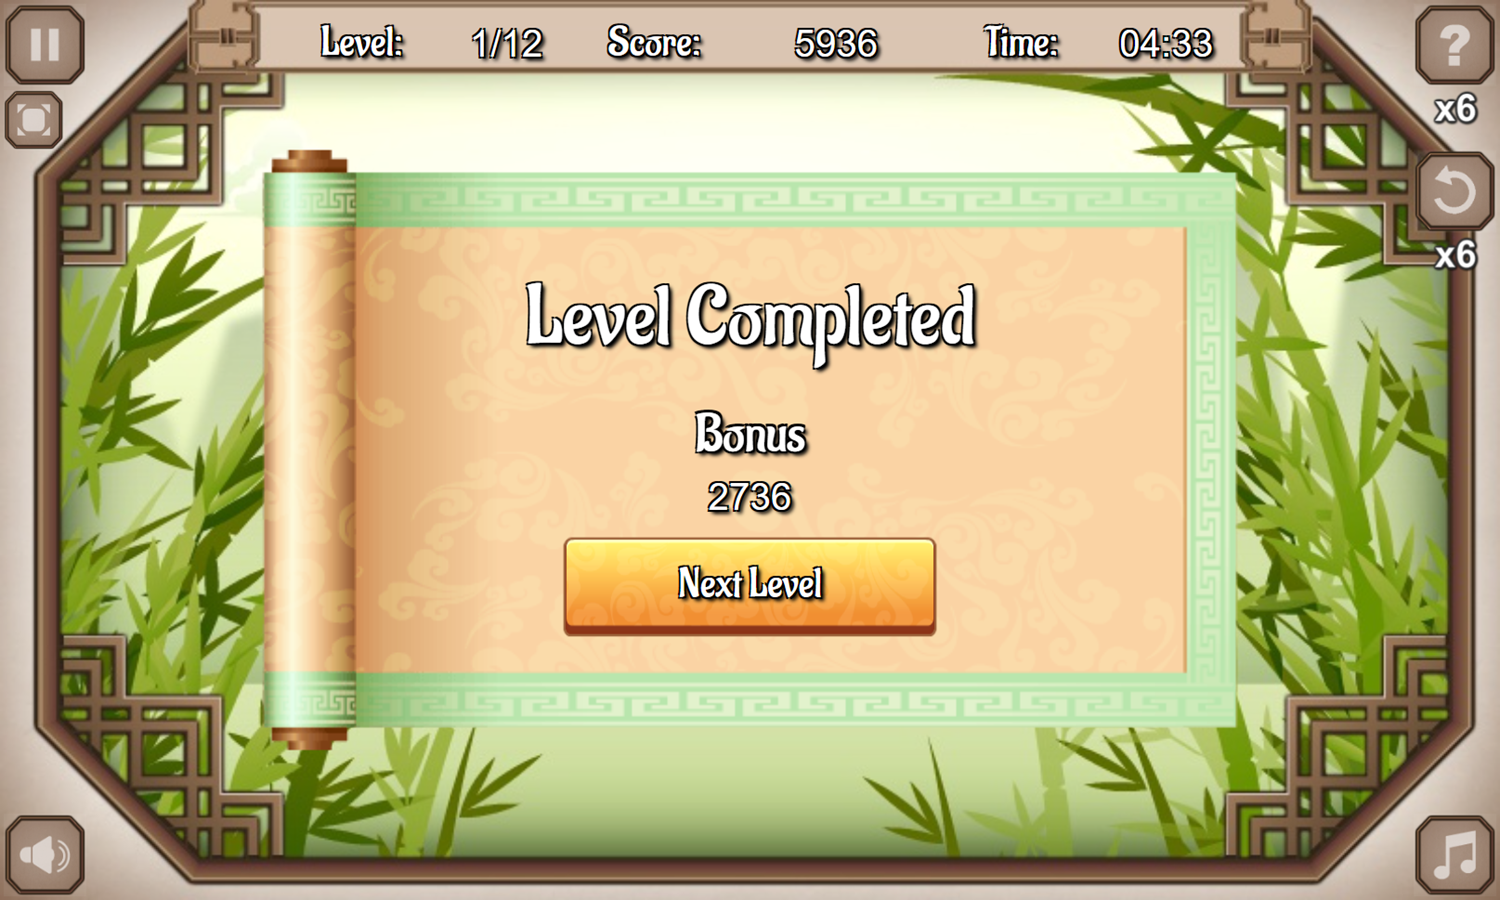 Mahjong Connect Game Level Completed Screenshot.